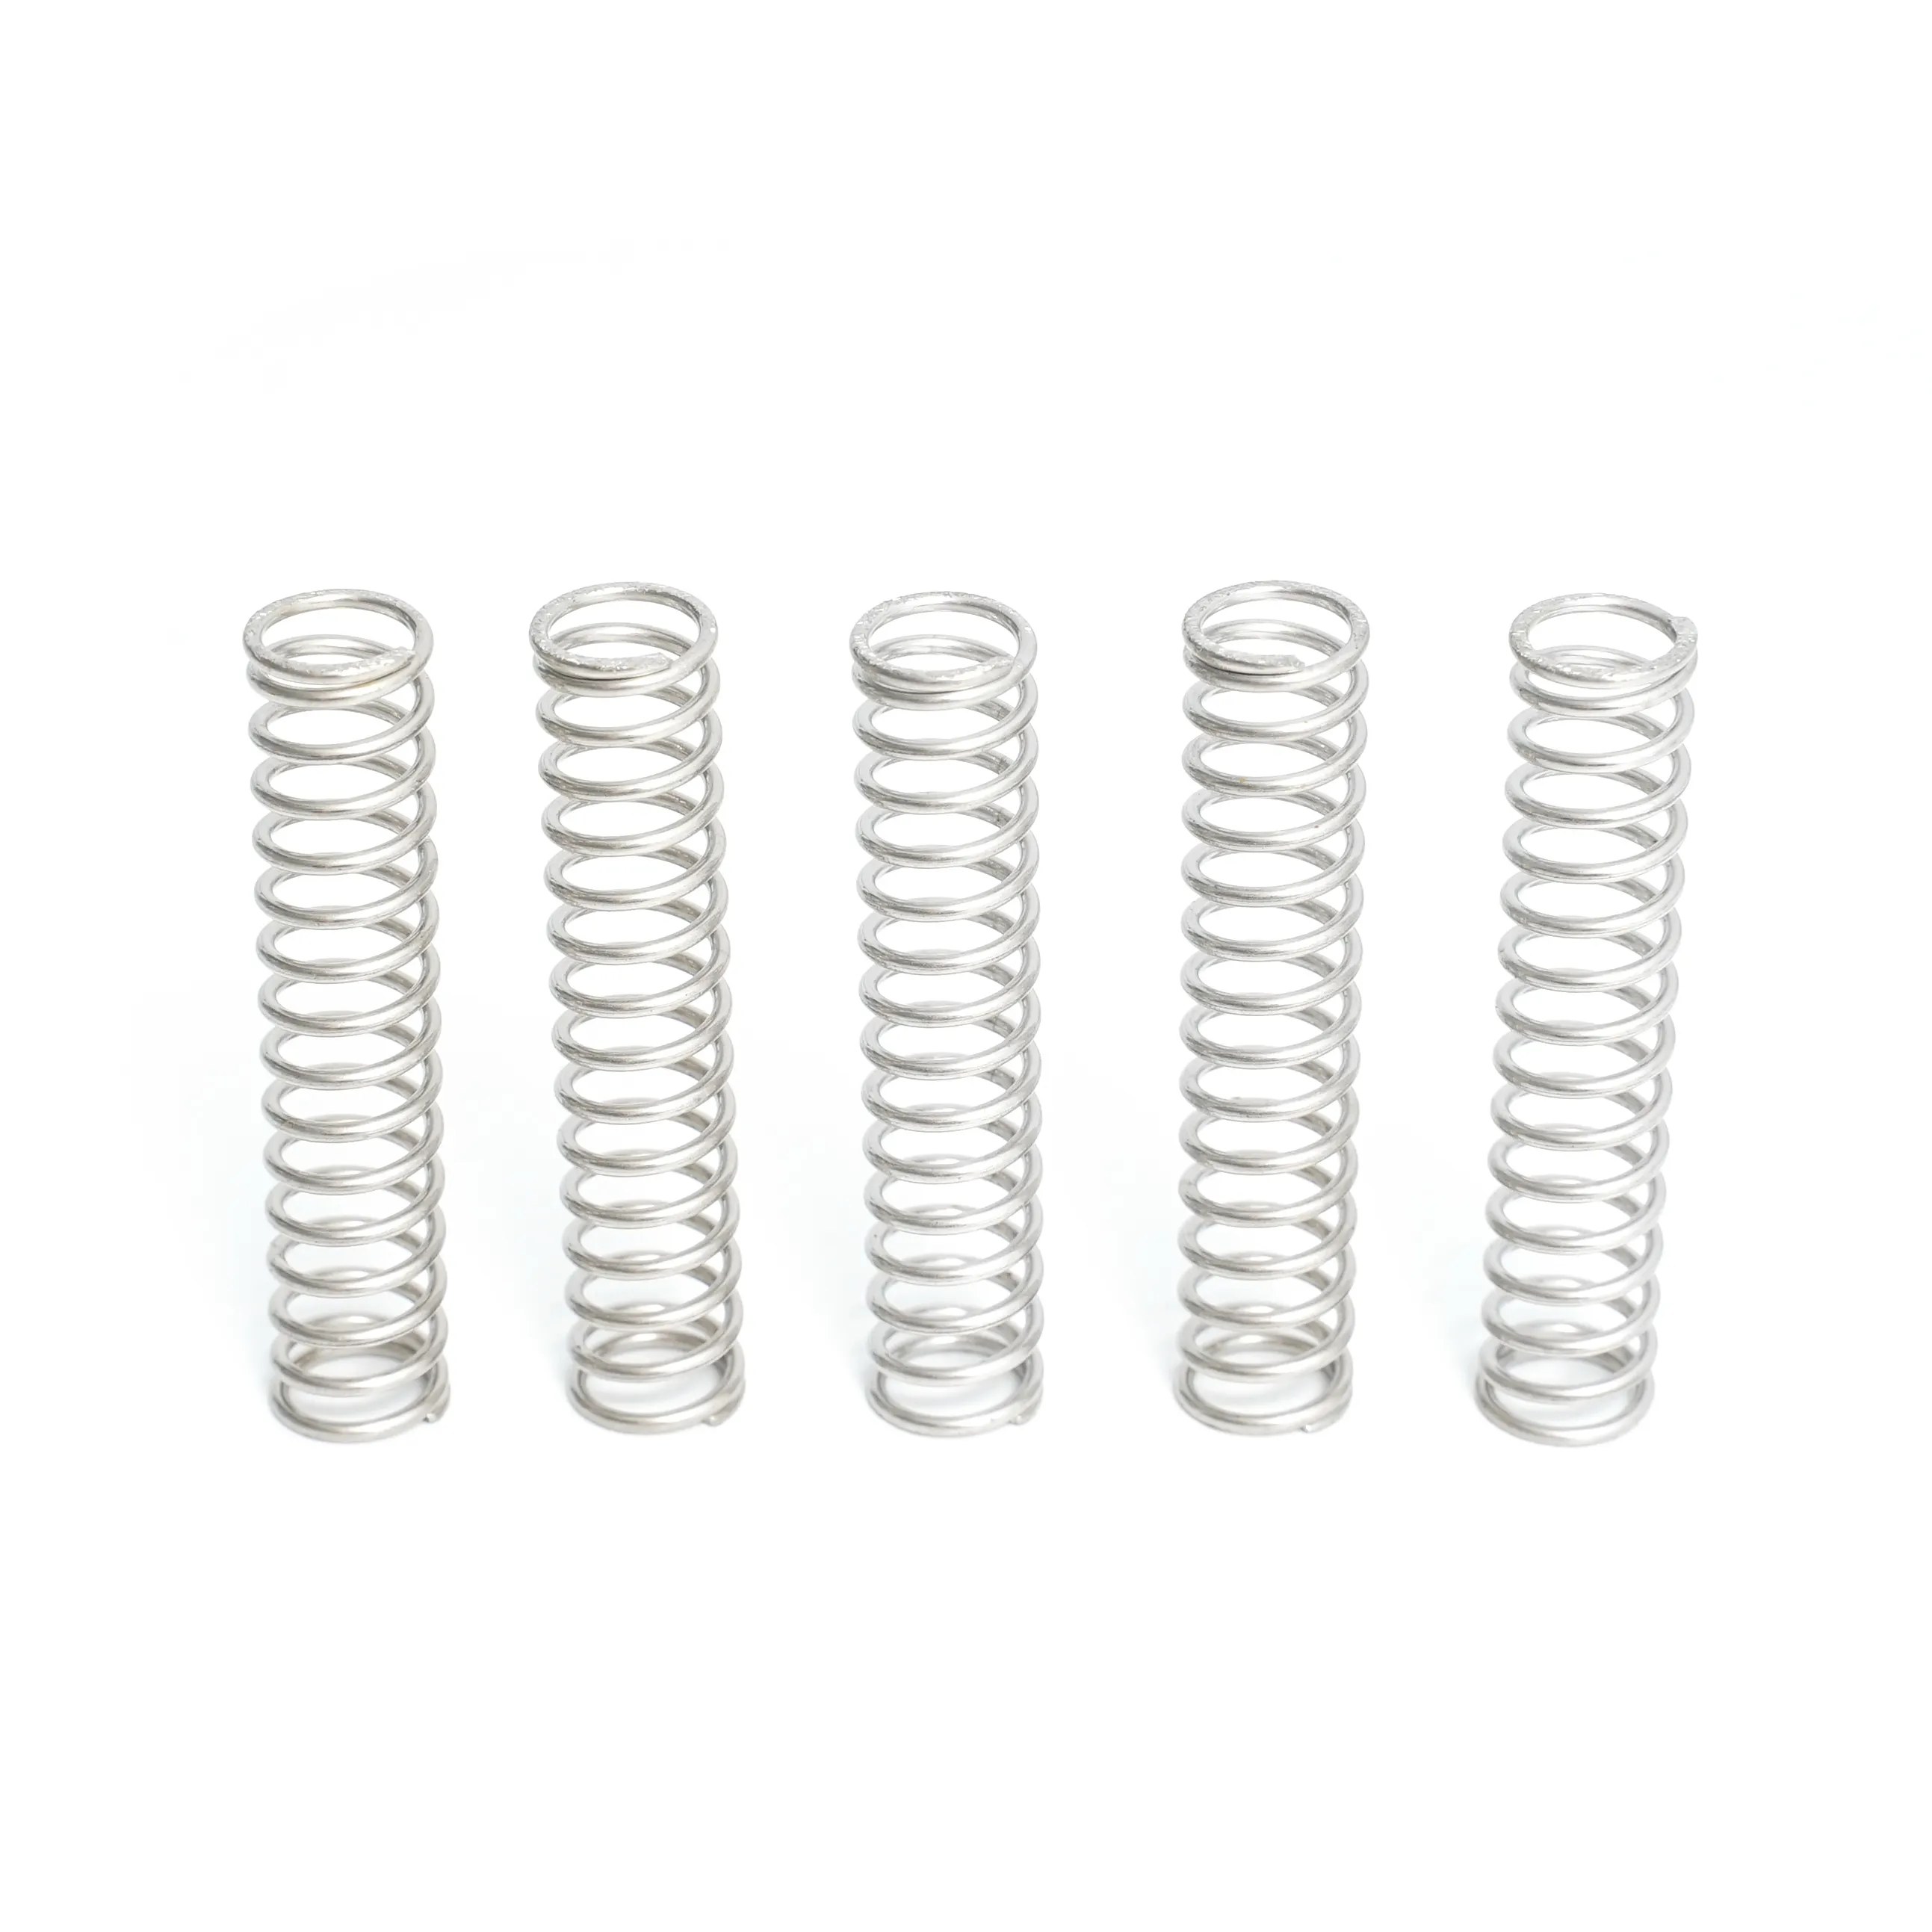 OEM metal coil spring compression stainless steel constant force spring coil extension torsion spring